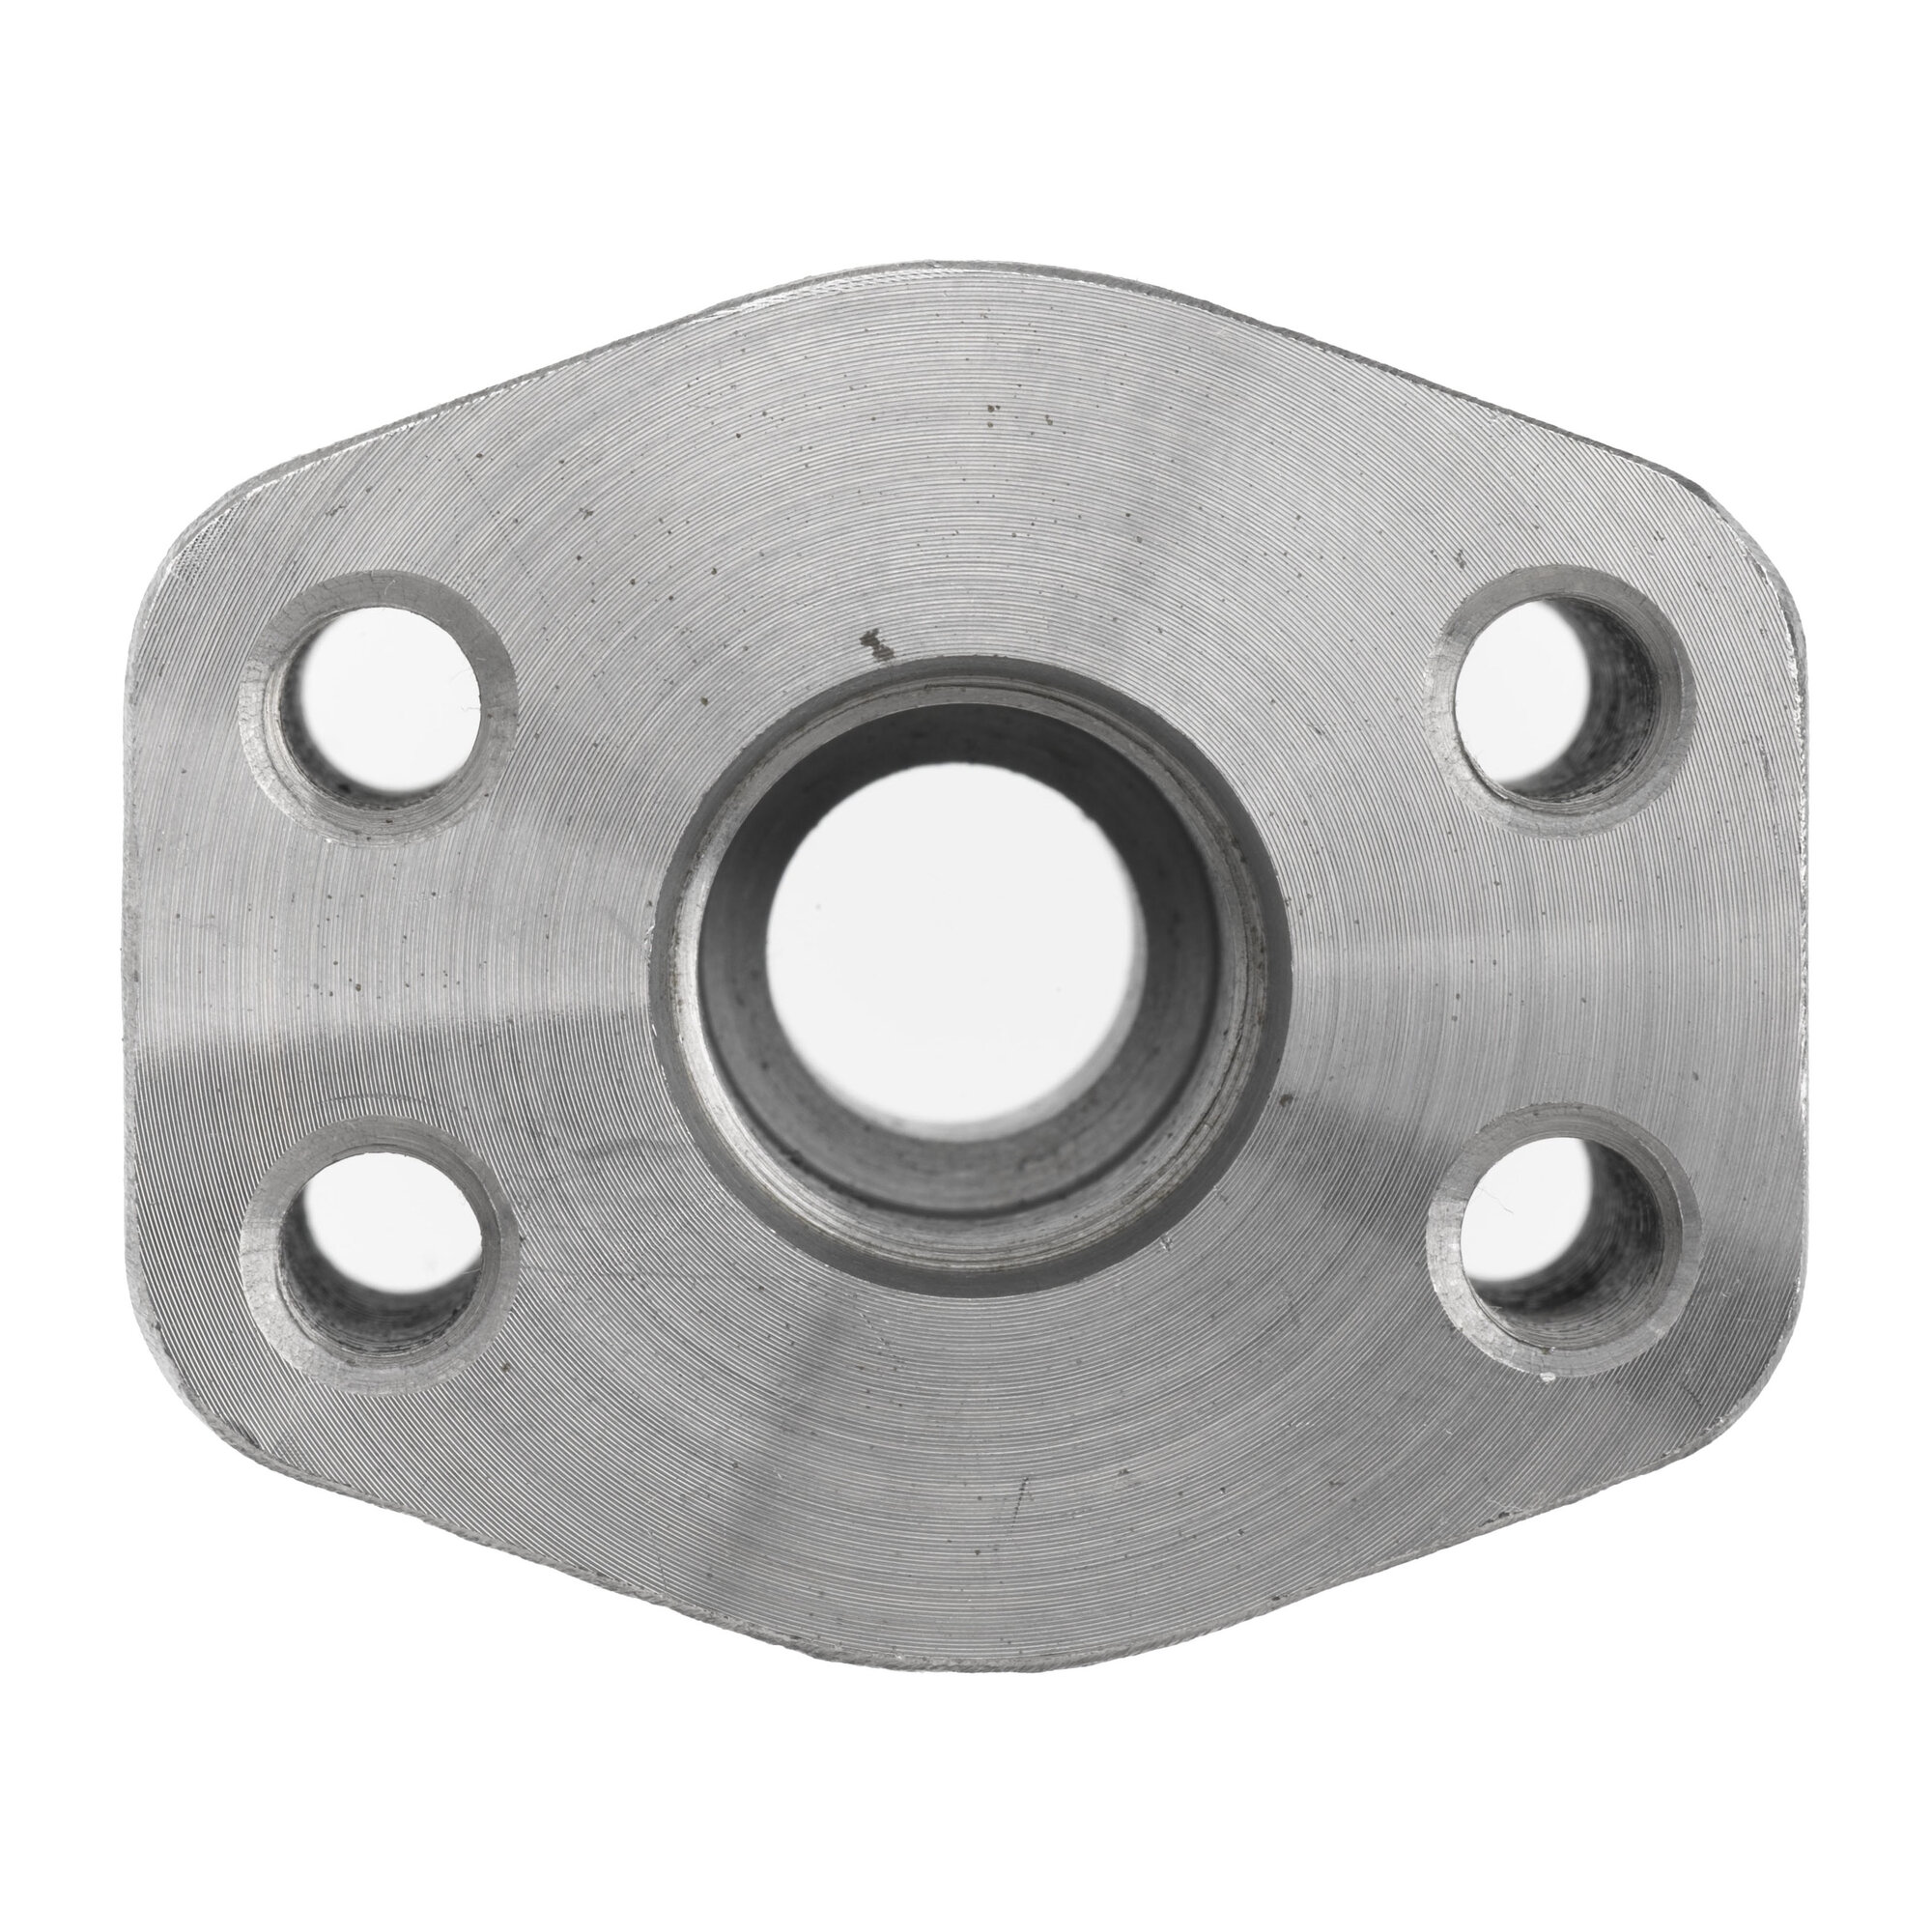 Brennan Industries' flange fittings are ideal for many applications